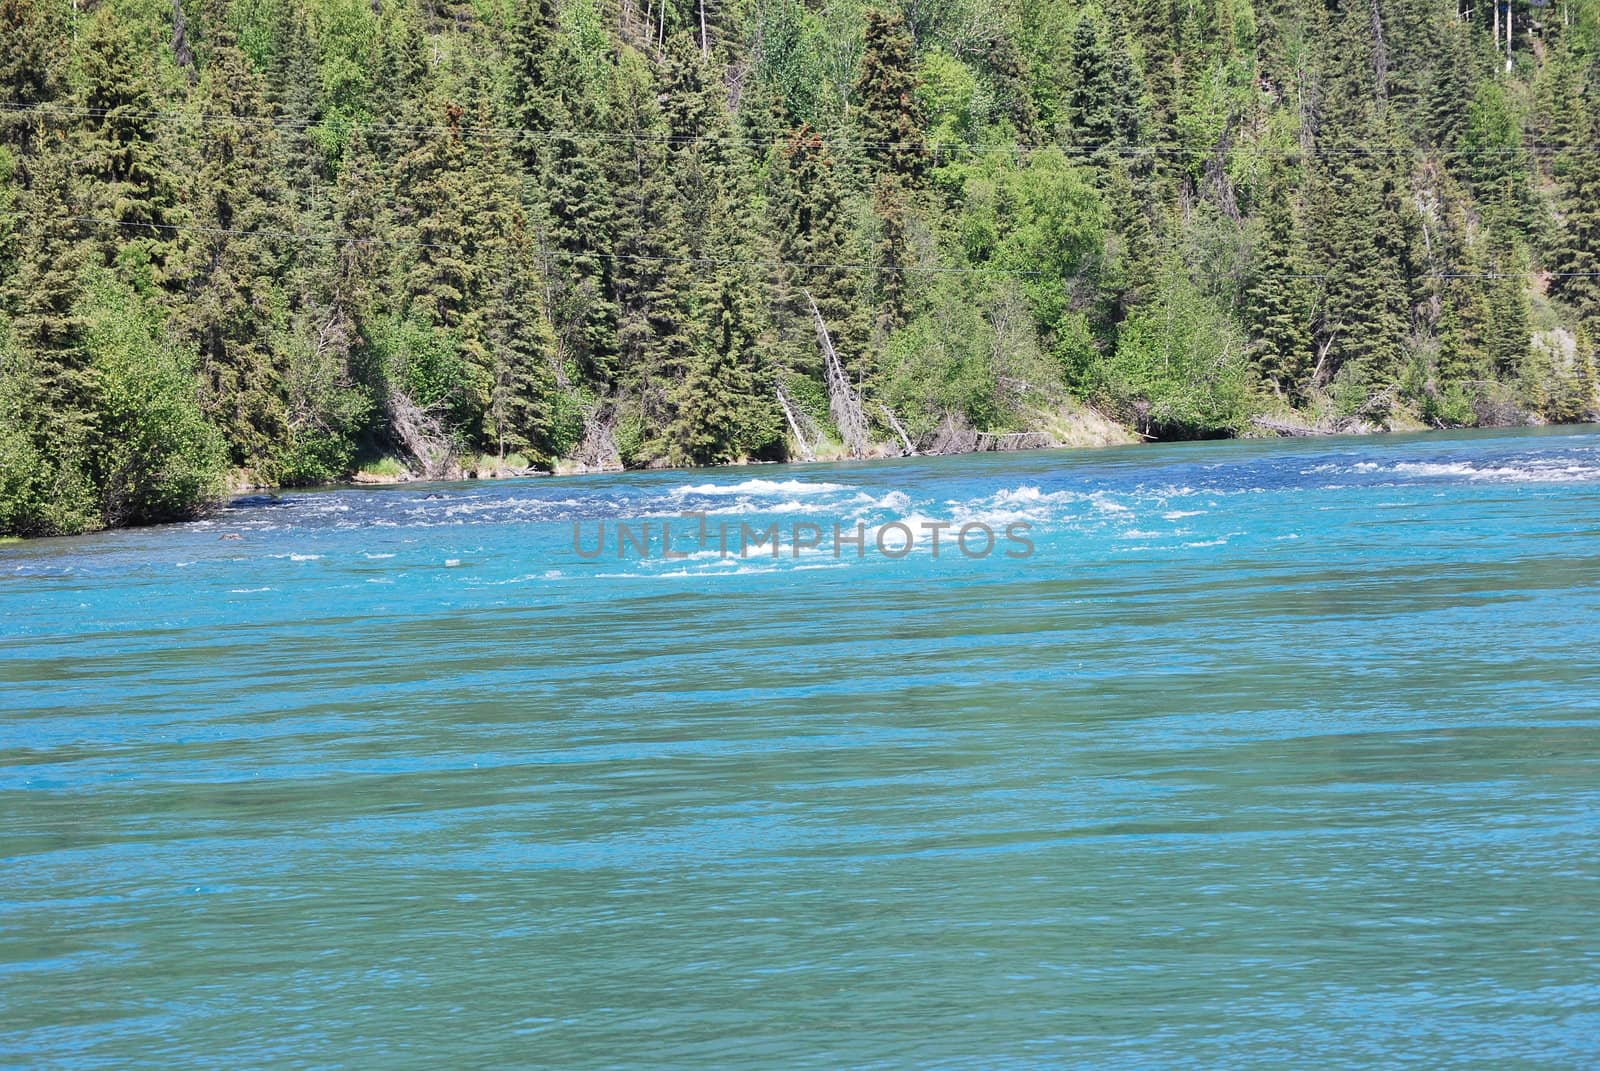 An occasional rapid on the Kenai River in Alaska by WKMarvin